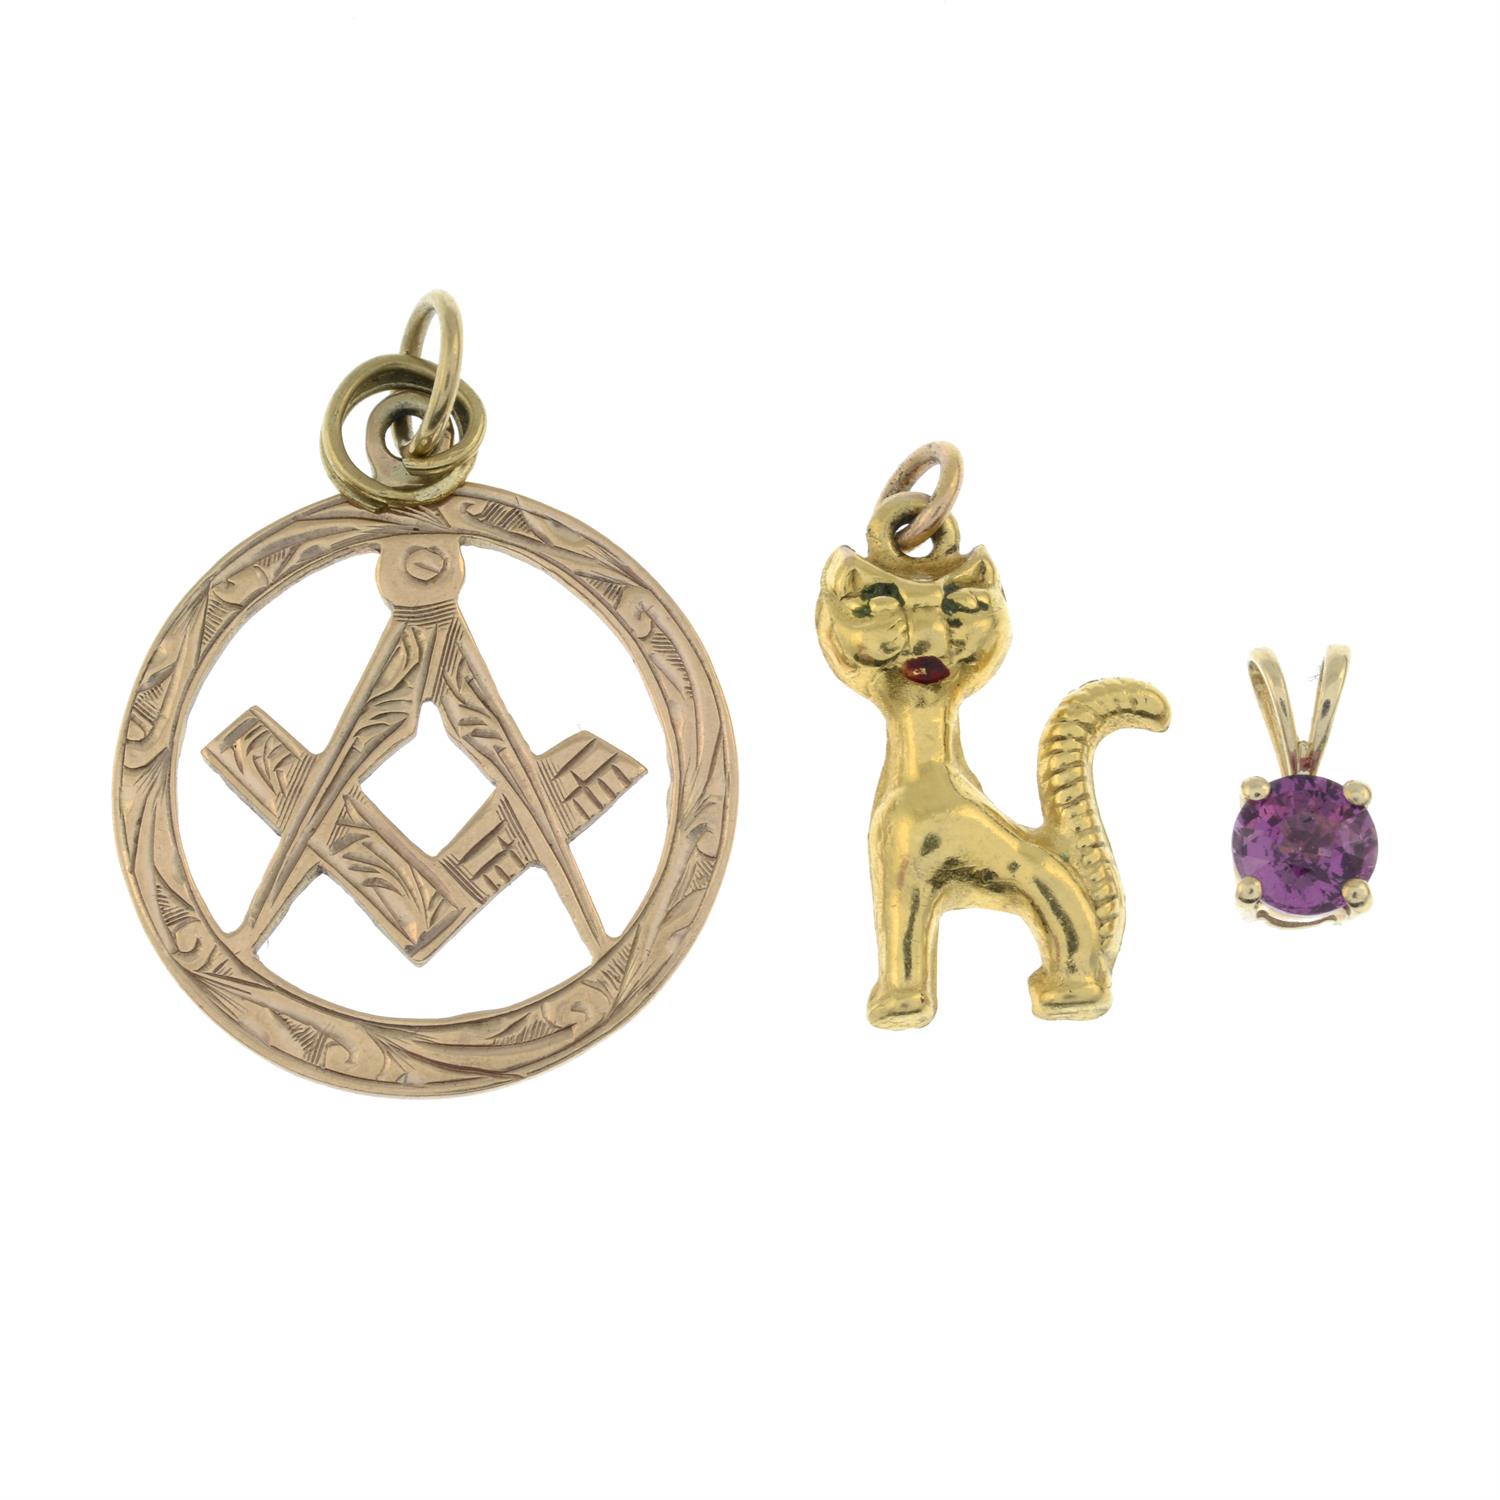 Four 9ct gold pendants together with two further gem-set pendants. - Image 2 of 4